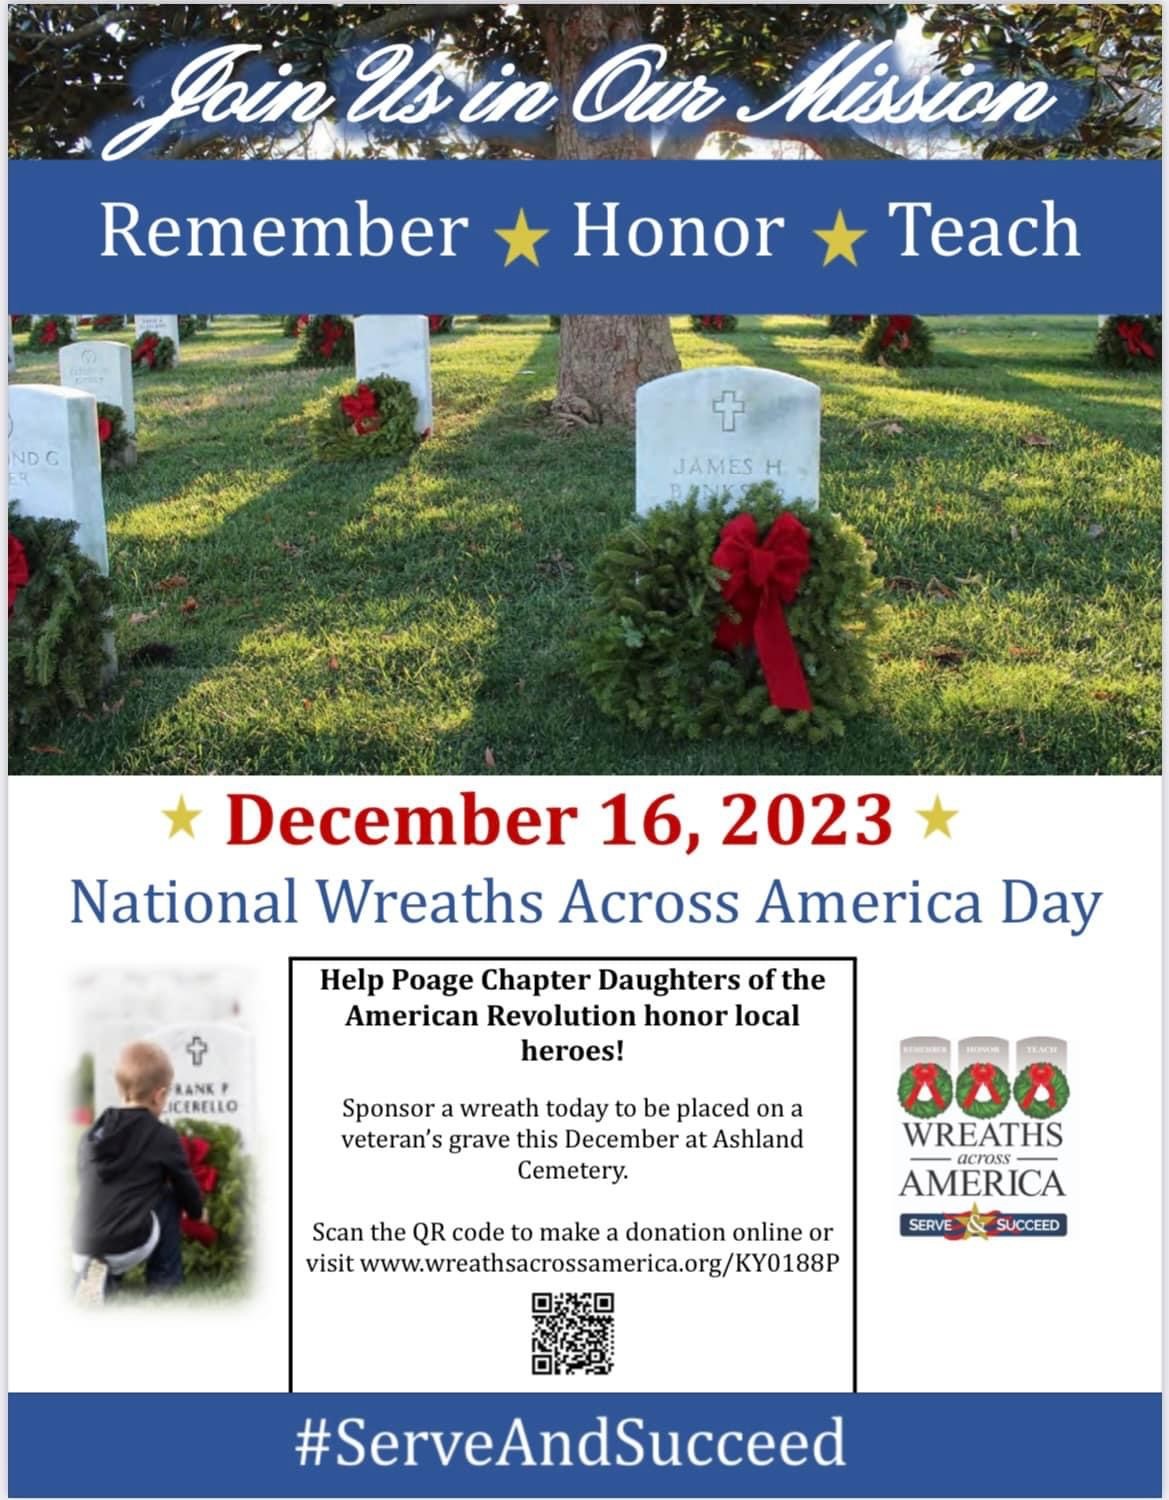 Showing Love for Our Servicemen with Wreaths Across America Event